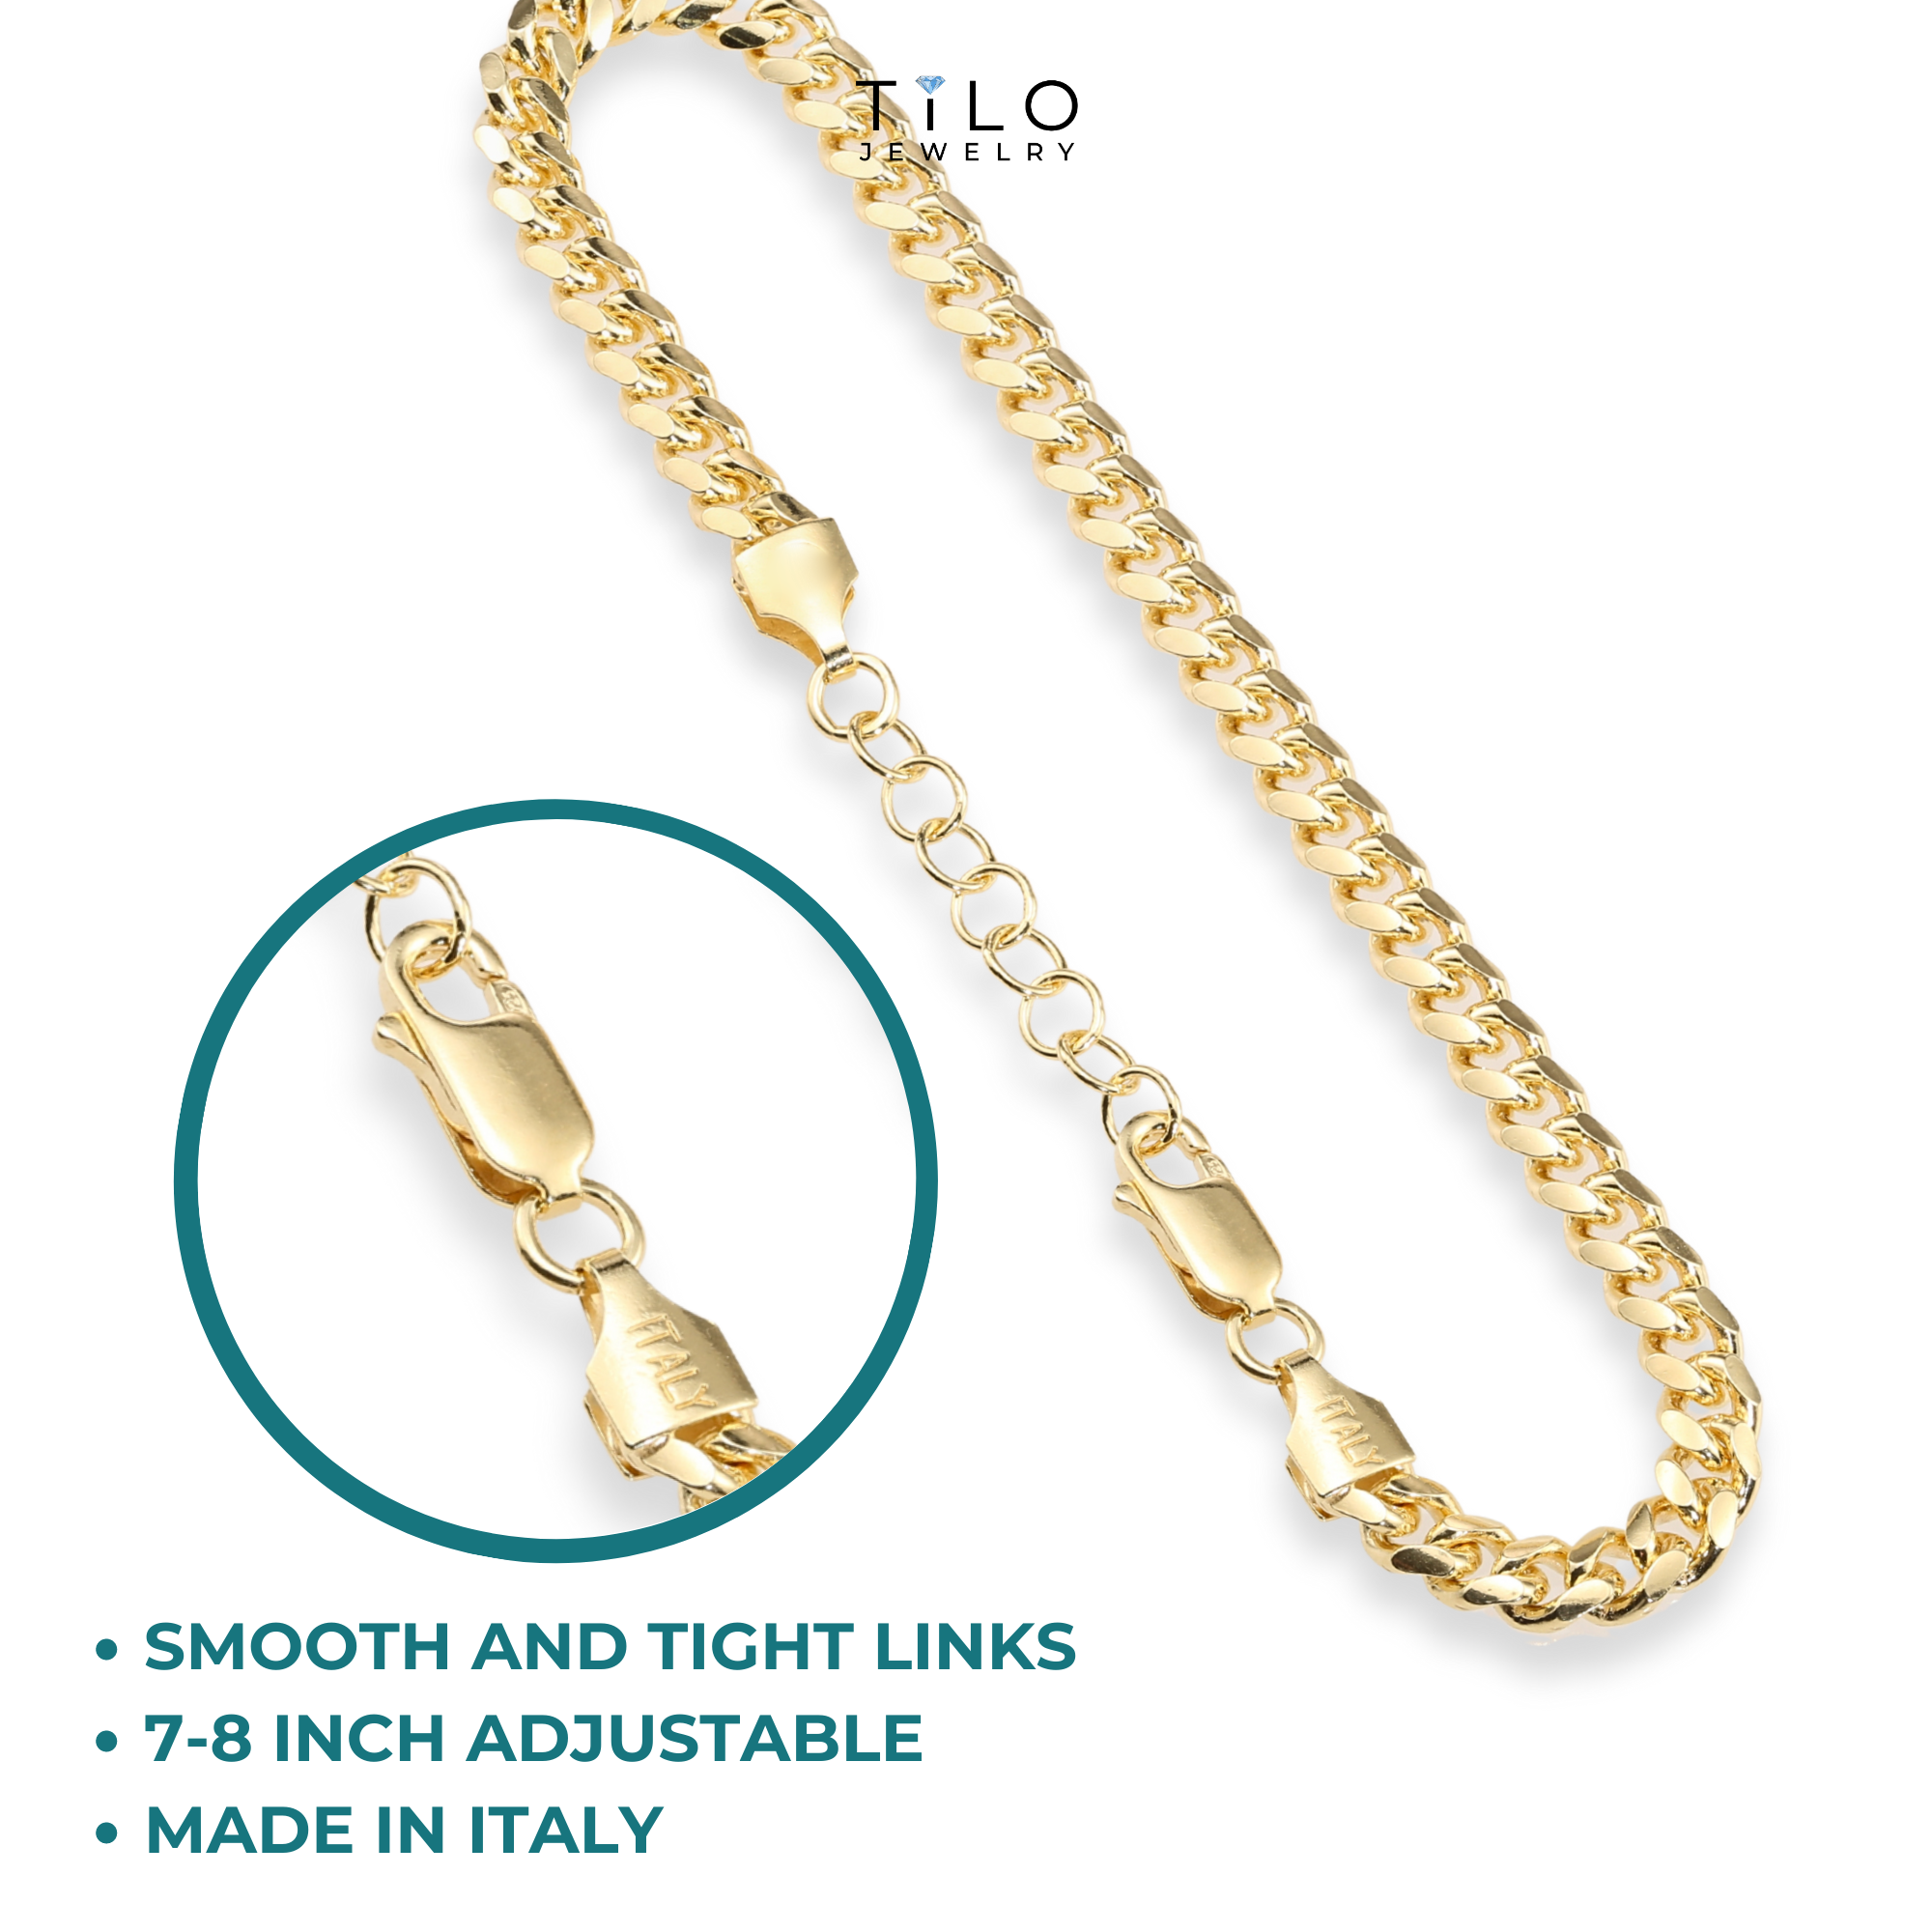 Miami Cuban Bracelet Dipped in 14k Yellow Gold, Solid Bracelet Available in 8 Inches or Adjustable Length 7 - 8 inches, Made In Italy in Sterling Silver